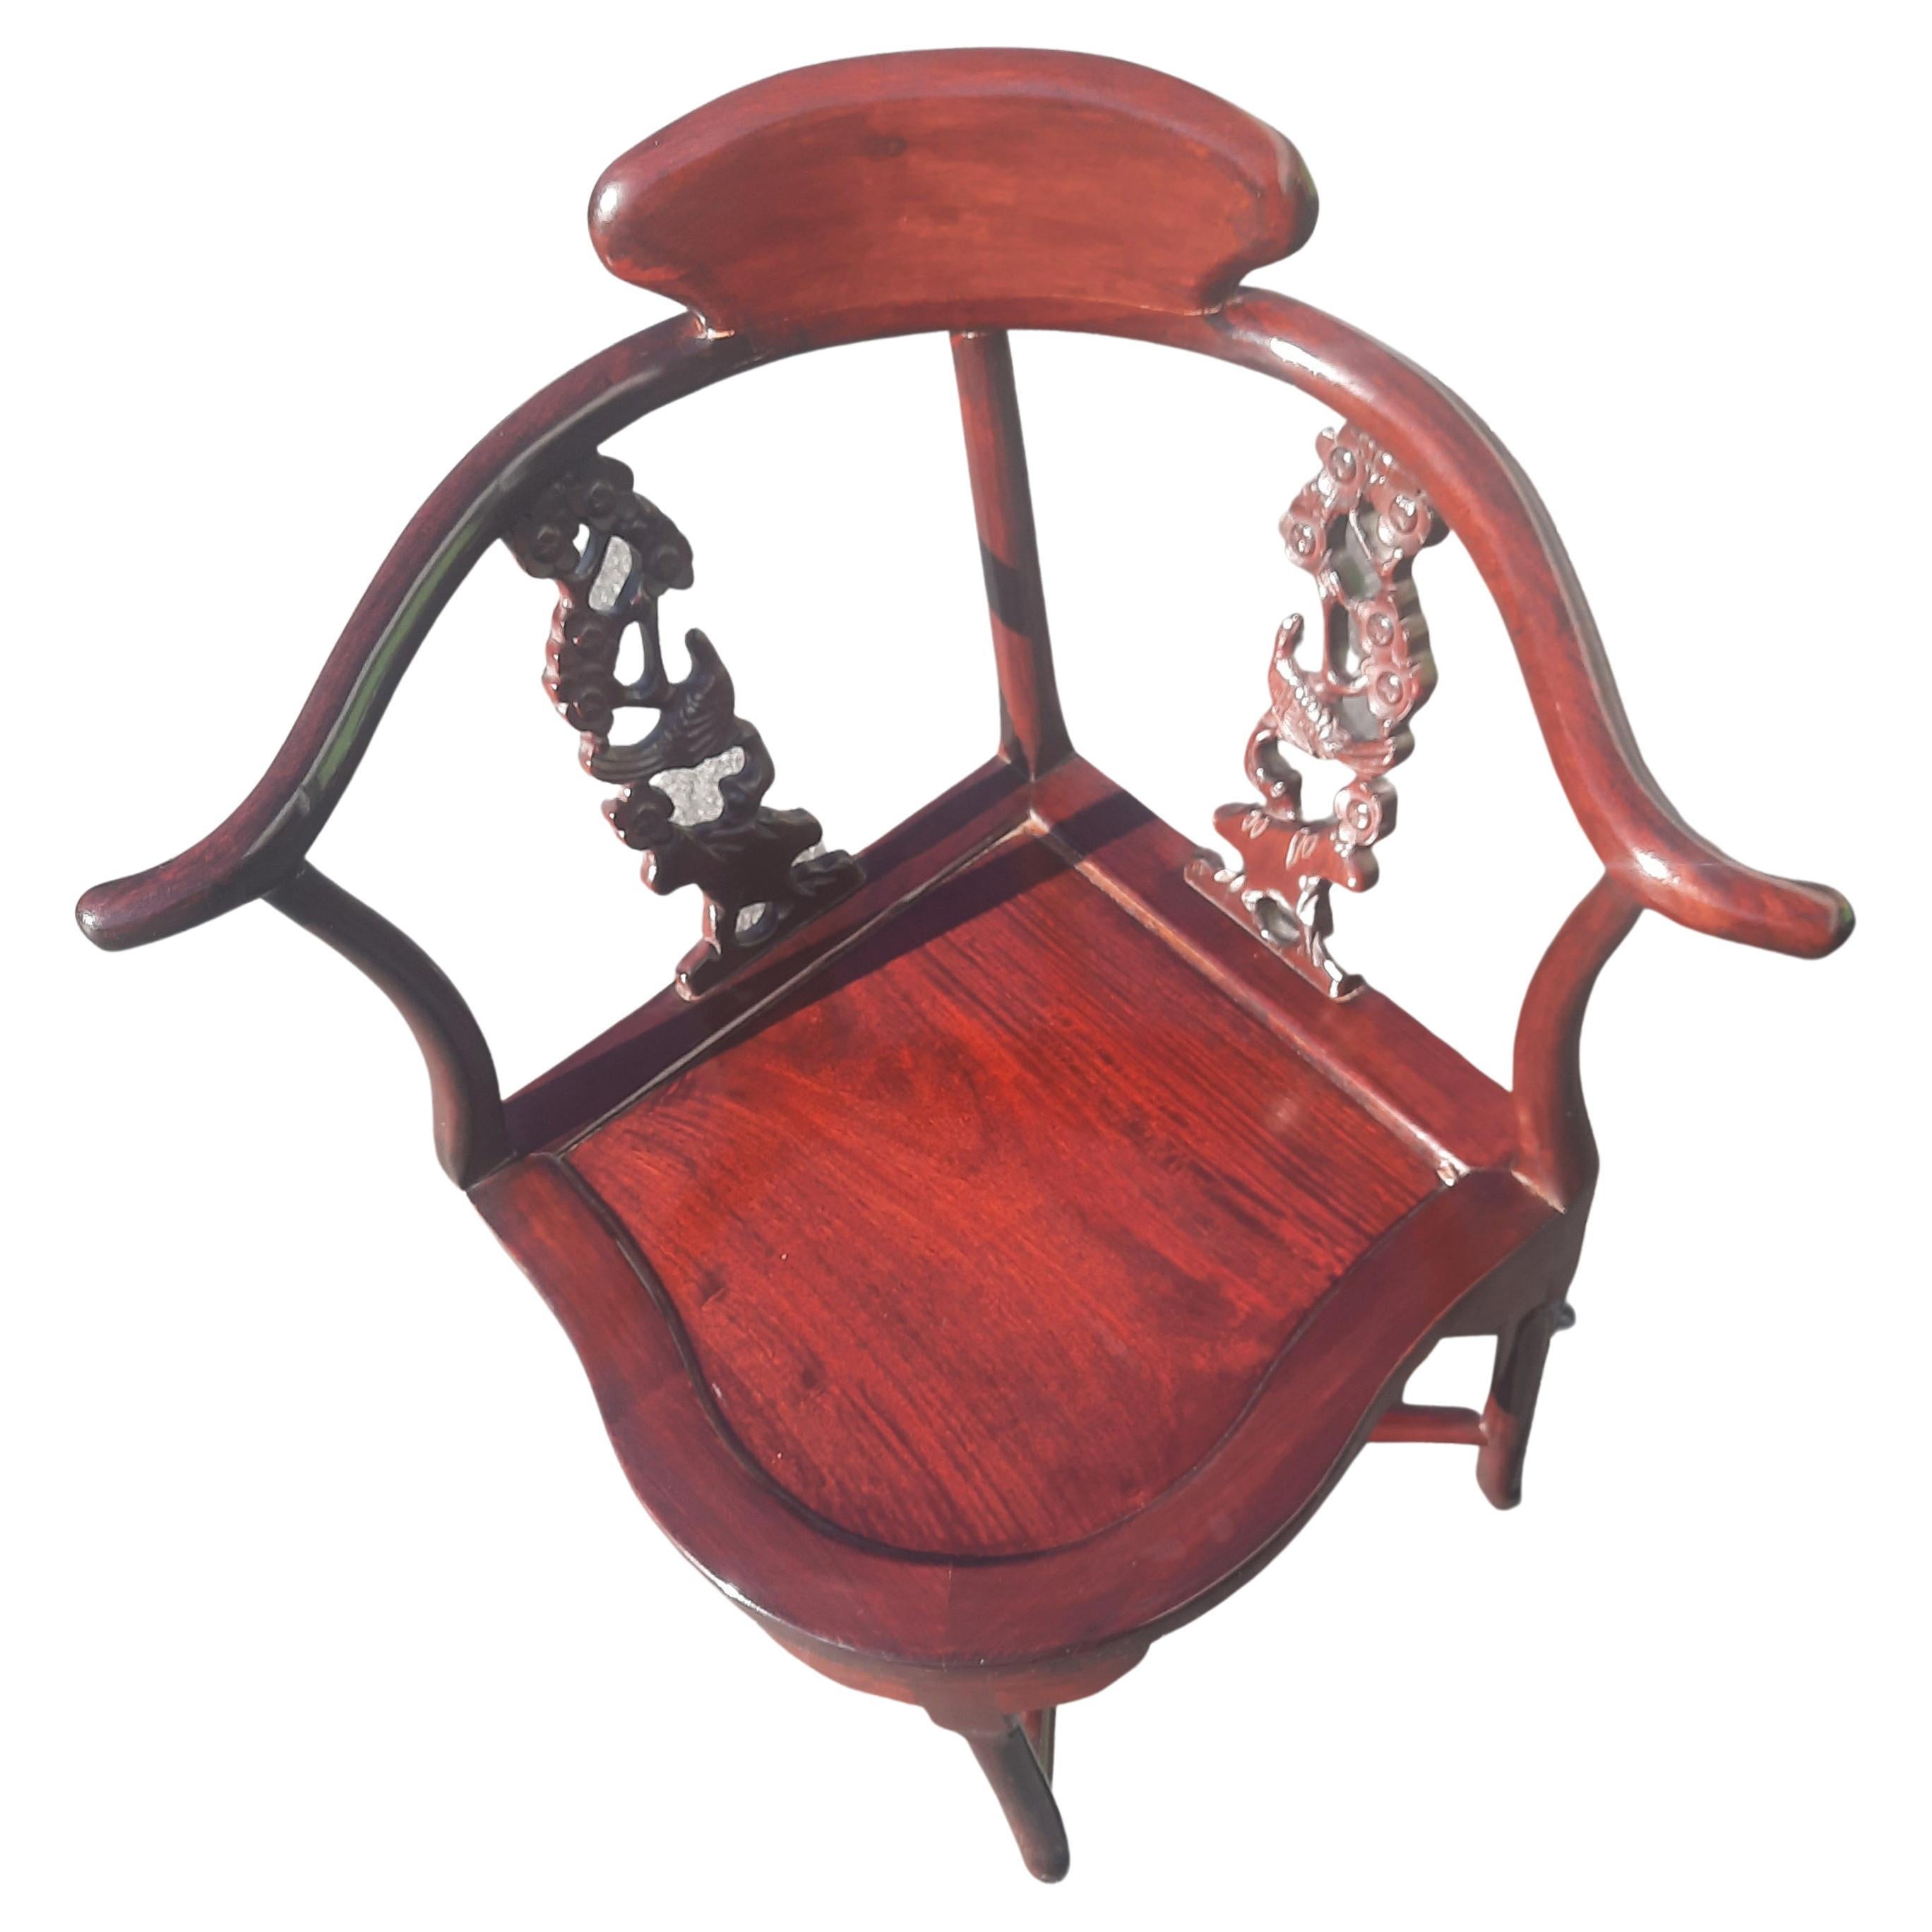 Vintage rosewood hand carved oriental corner chair

Chic solid rosewood oriental corner chair hand carved in front and back. This charming piece is finely crafted by hand. Constructed with precision tongue and groove. Joined without nails. Shiny